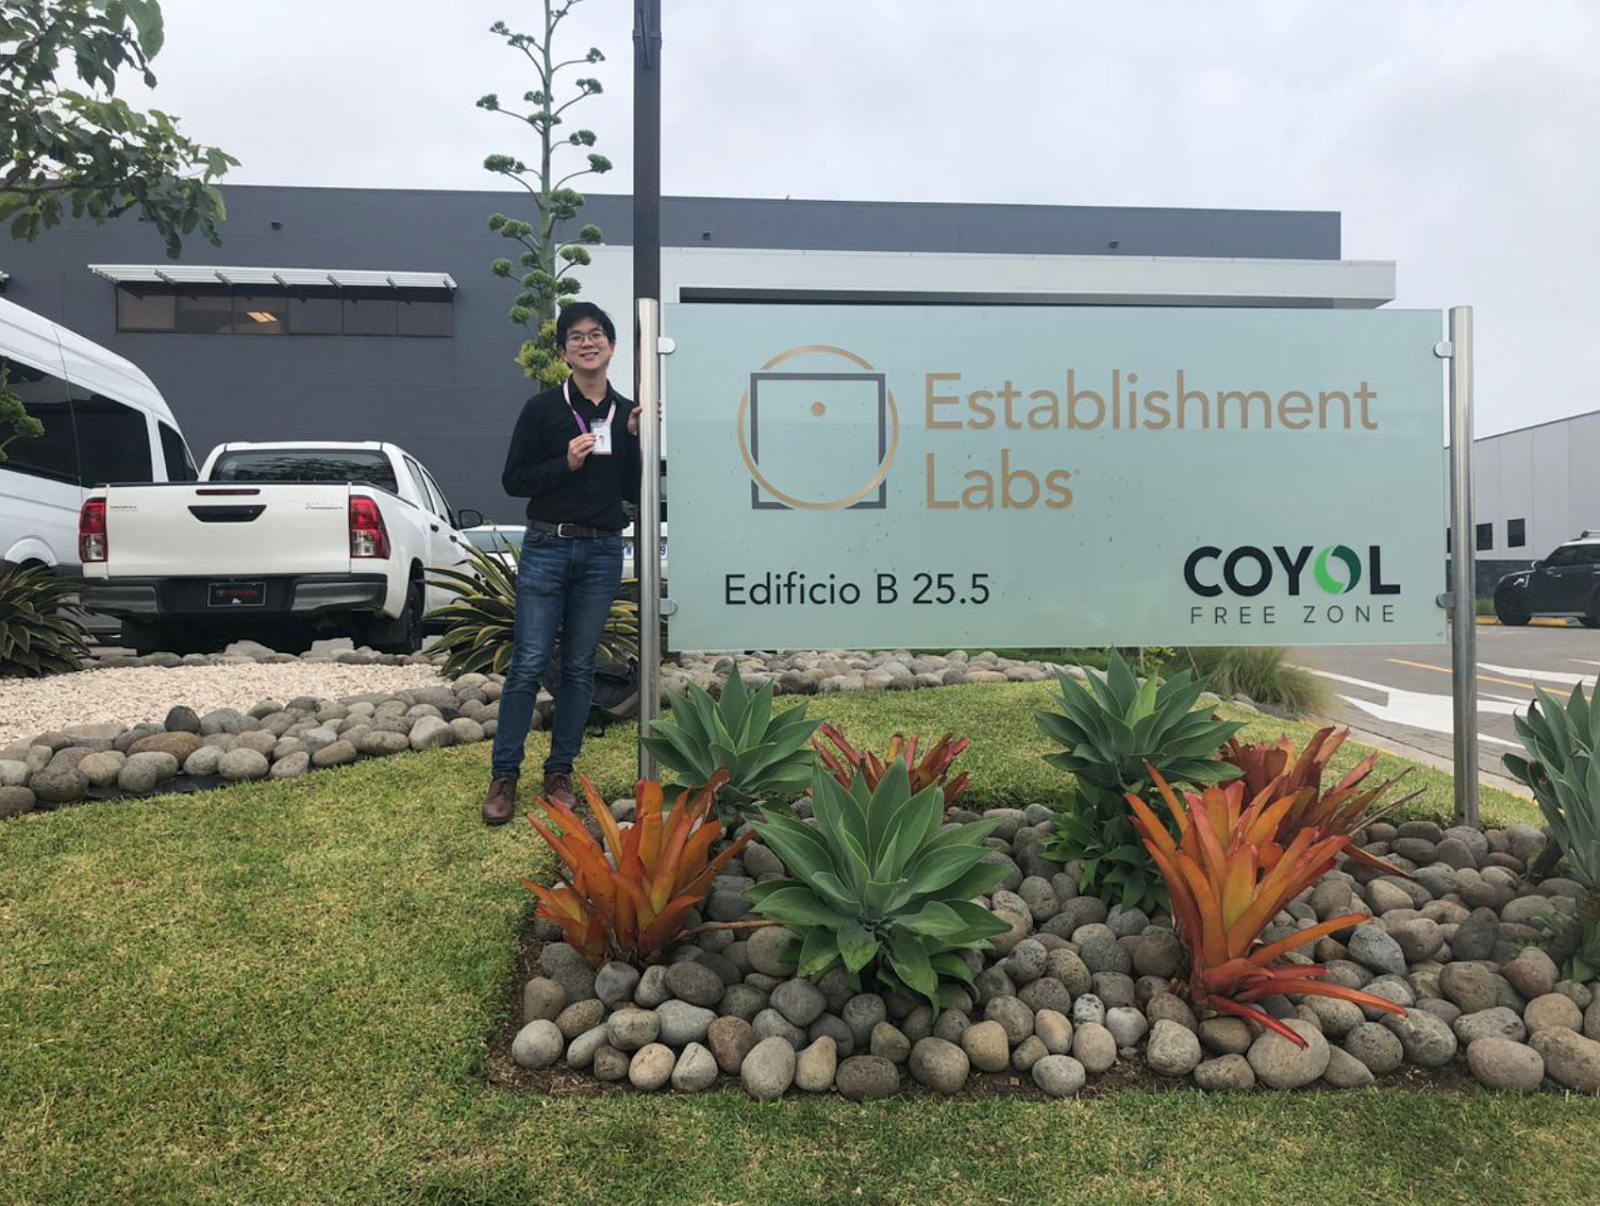 Erik Wu stands in front of the sign for Establishment Labs in Costa Rica.